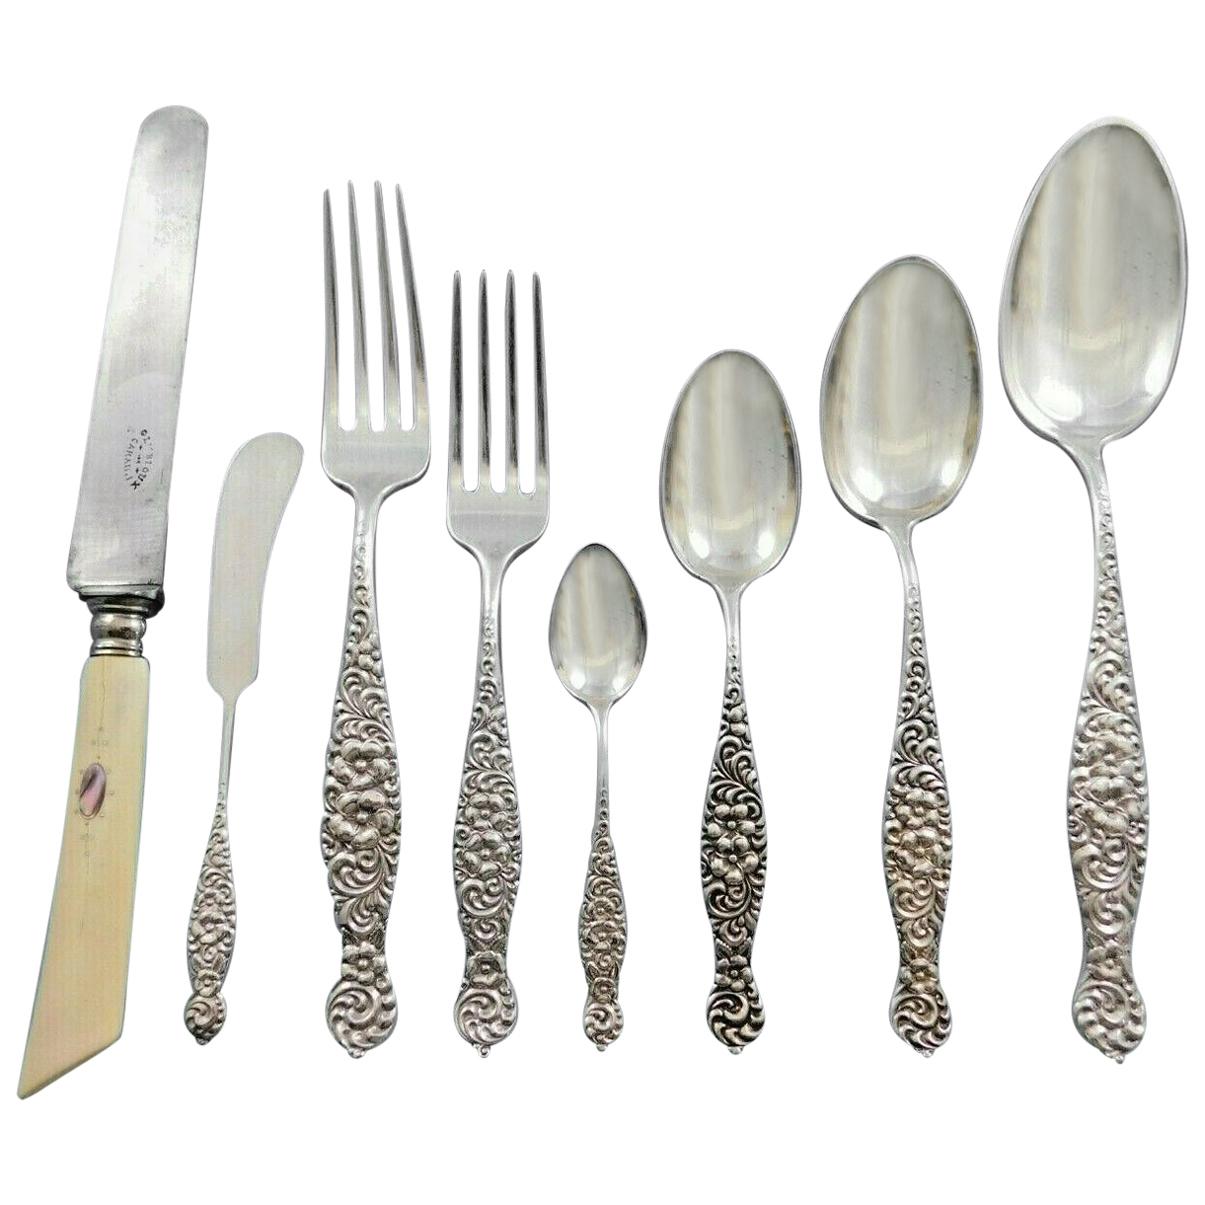 Number 3 by Duhme Sterling Silver Flatware Set Service 92 Pieces, circa 1885